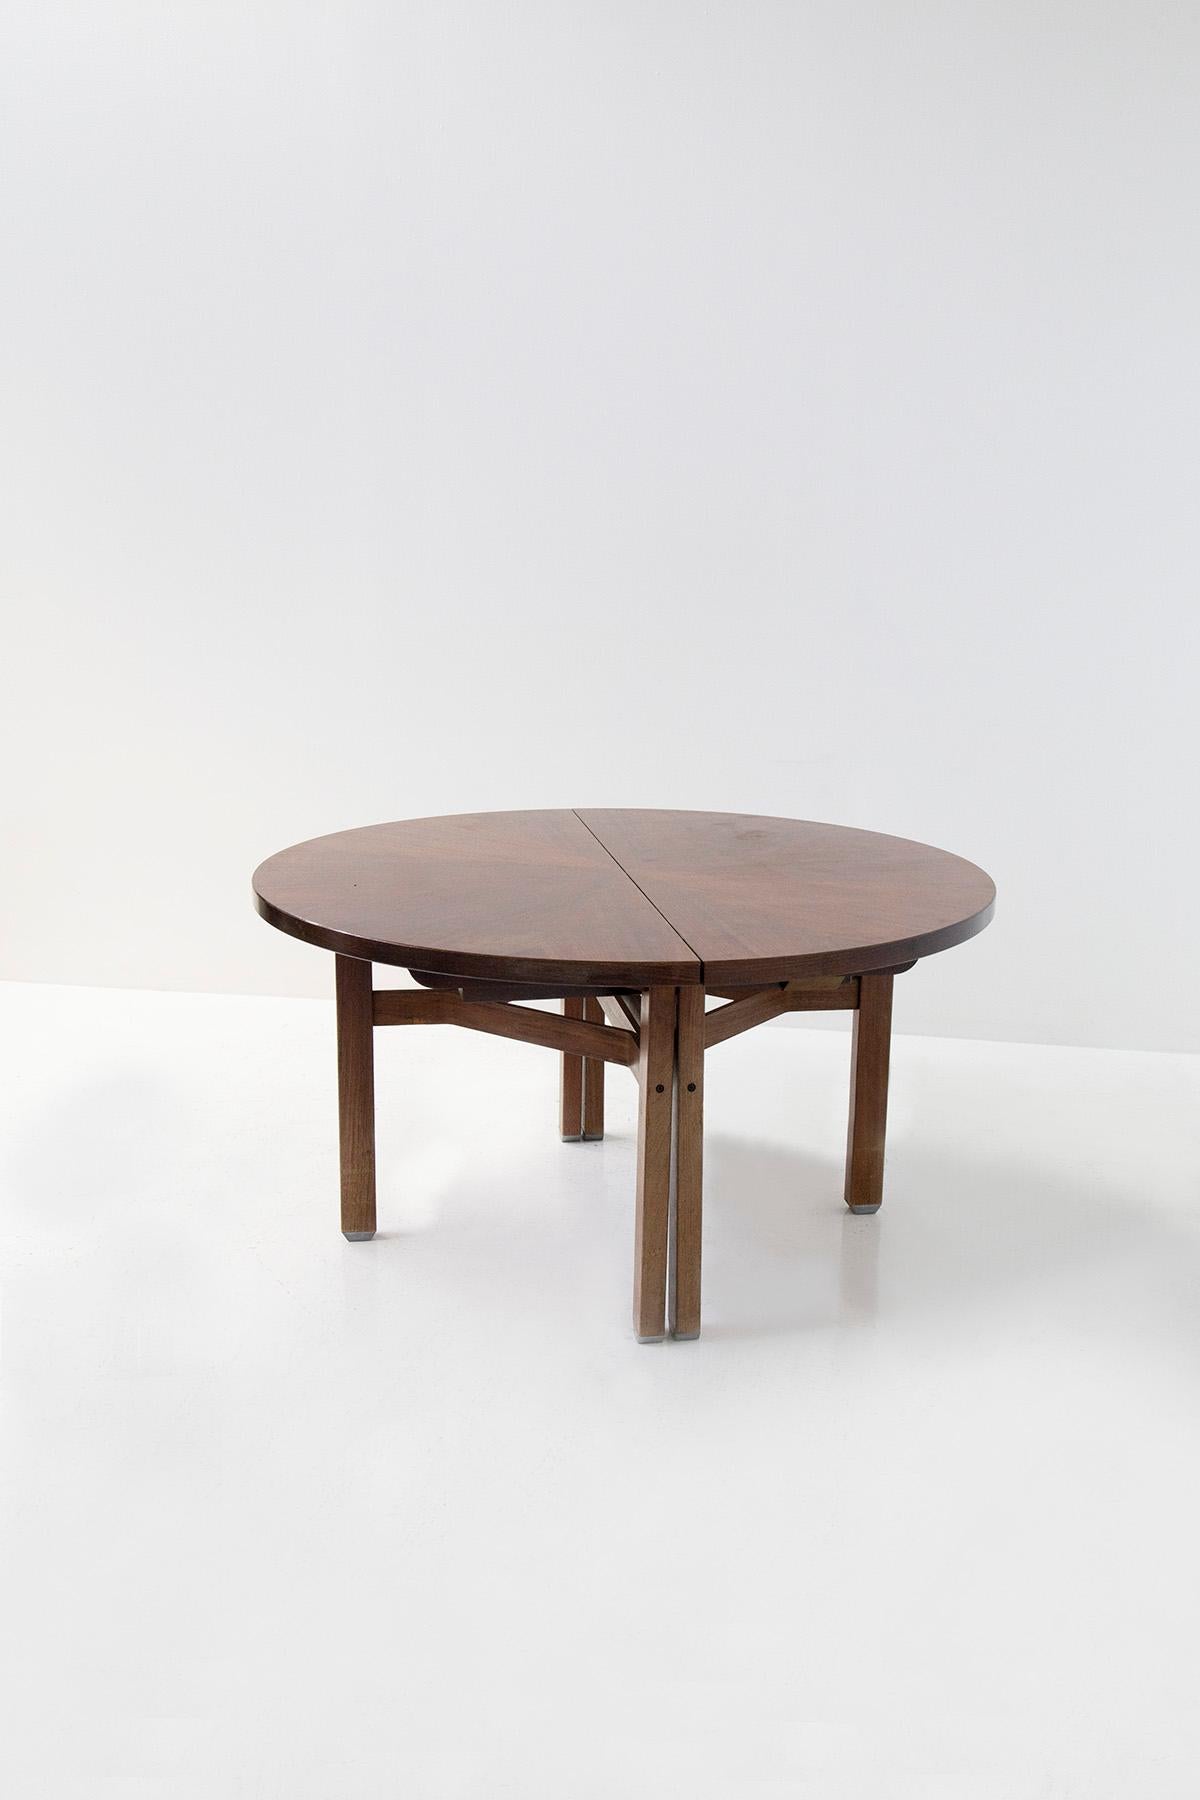 The Olbia table by Ico Parisi, a masterpiece of design and craftsmanship, is a true testament to the elegance and innovation of mid-century Italian furniture. Its graceful circular form, combined with the use of teak wood, brings an aura of timeless